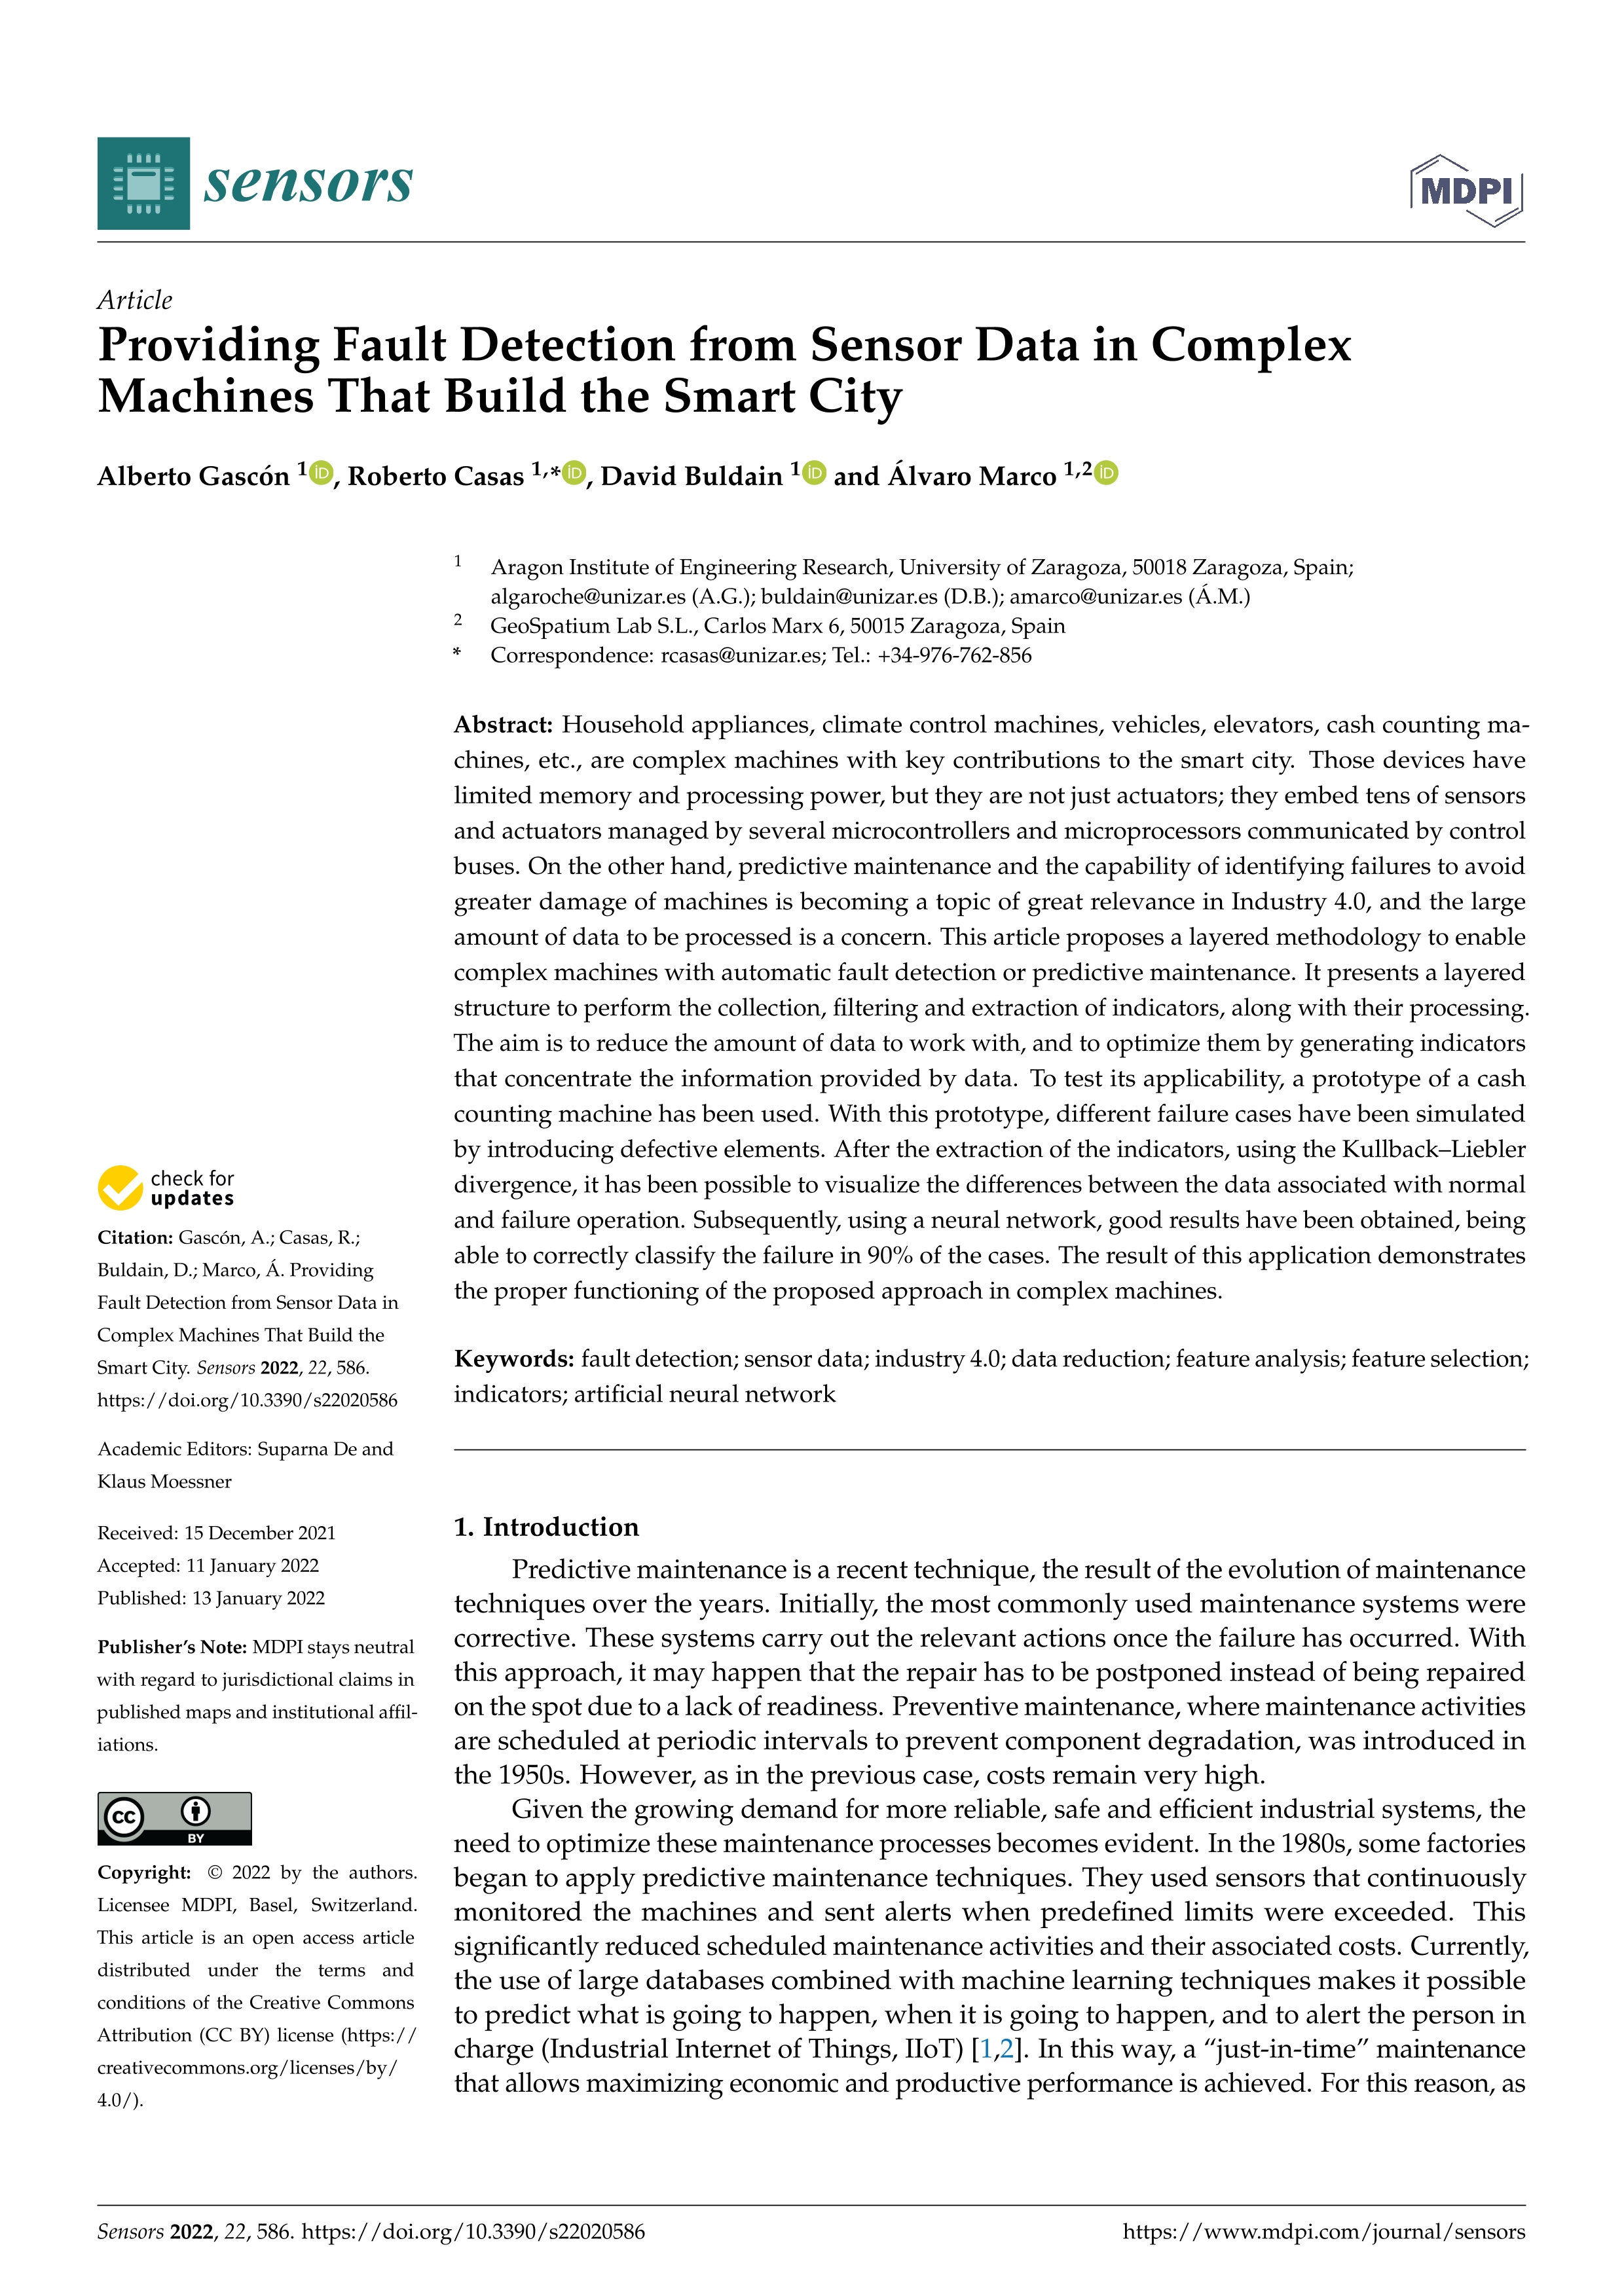 Providing Fault Detection from Sensor Data in Complex Machines That Build the Smart City